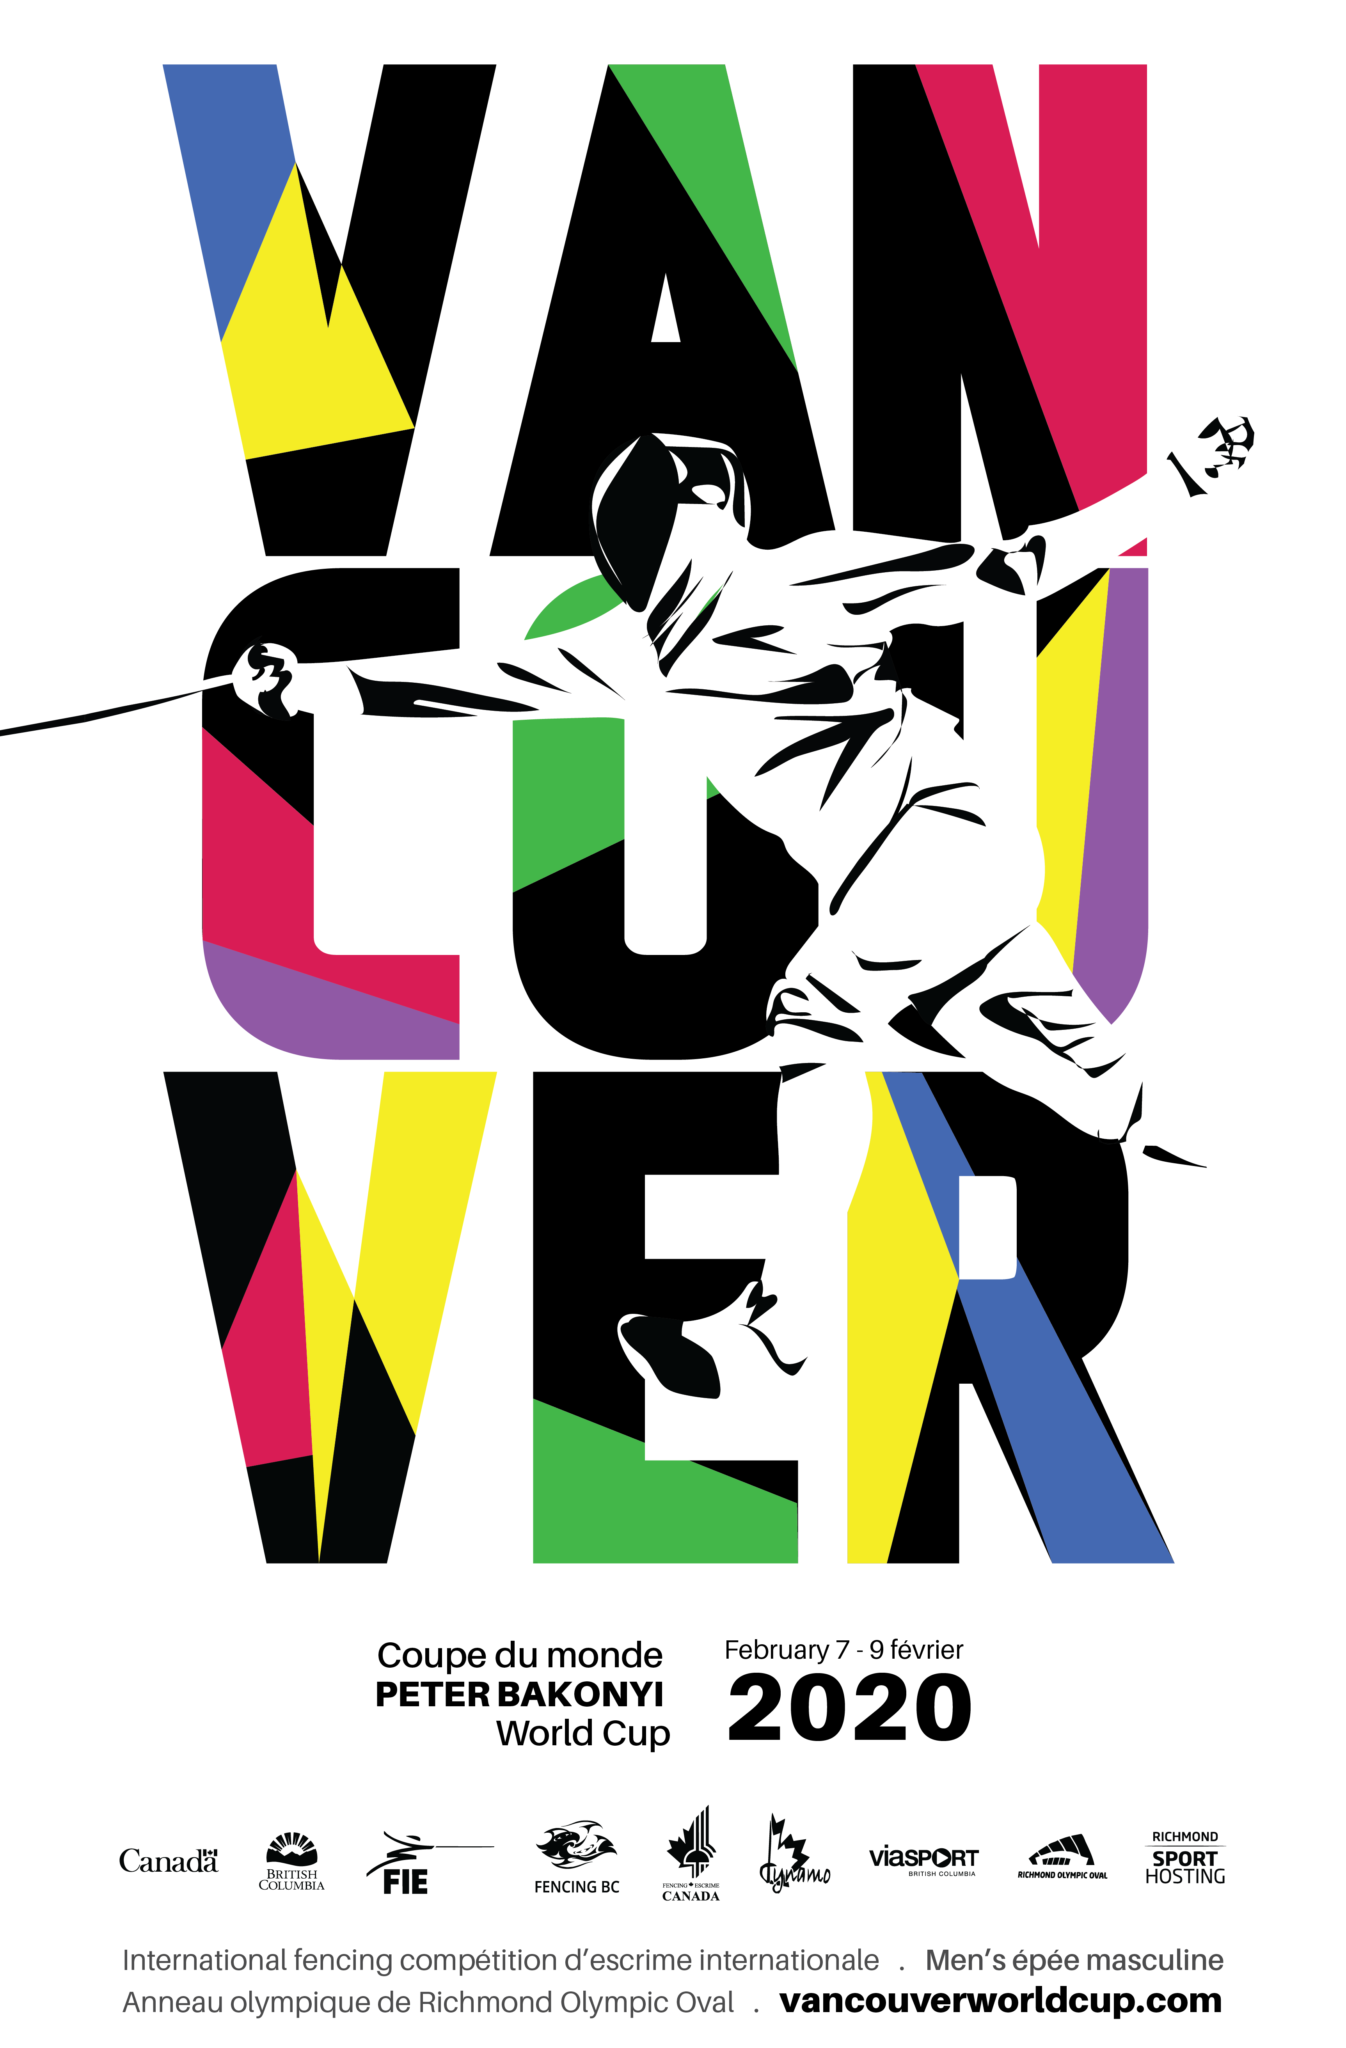 2020 poster: A white silhouette with black shadows of a fencer in front of the word VANCOUVER - each three letters on their own line in very thick font and splashes of bright blue, yellow, purple, green and pink on each letter.